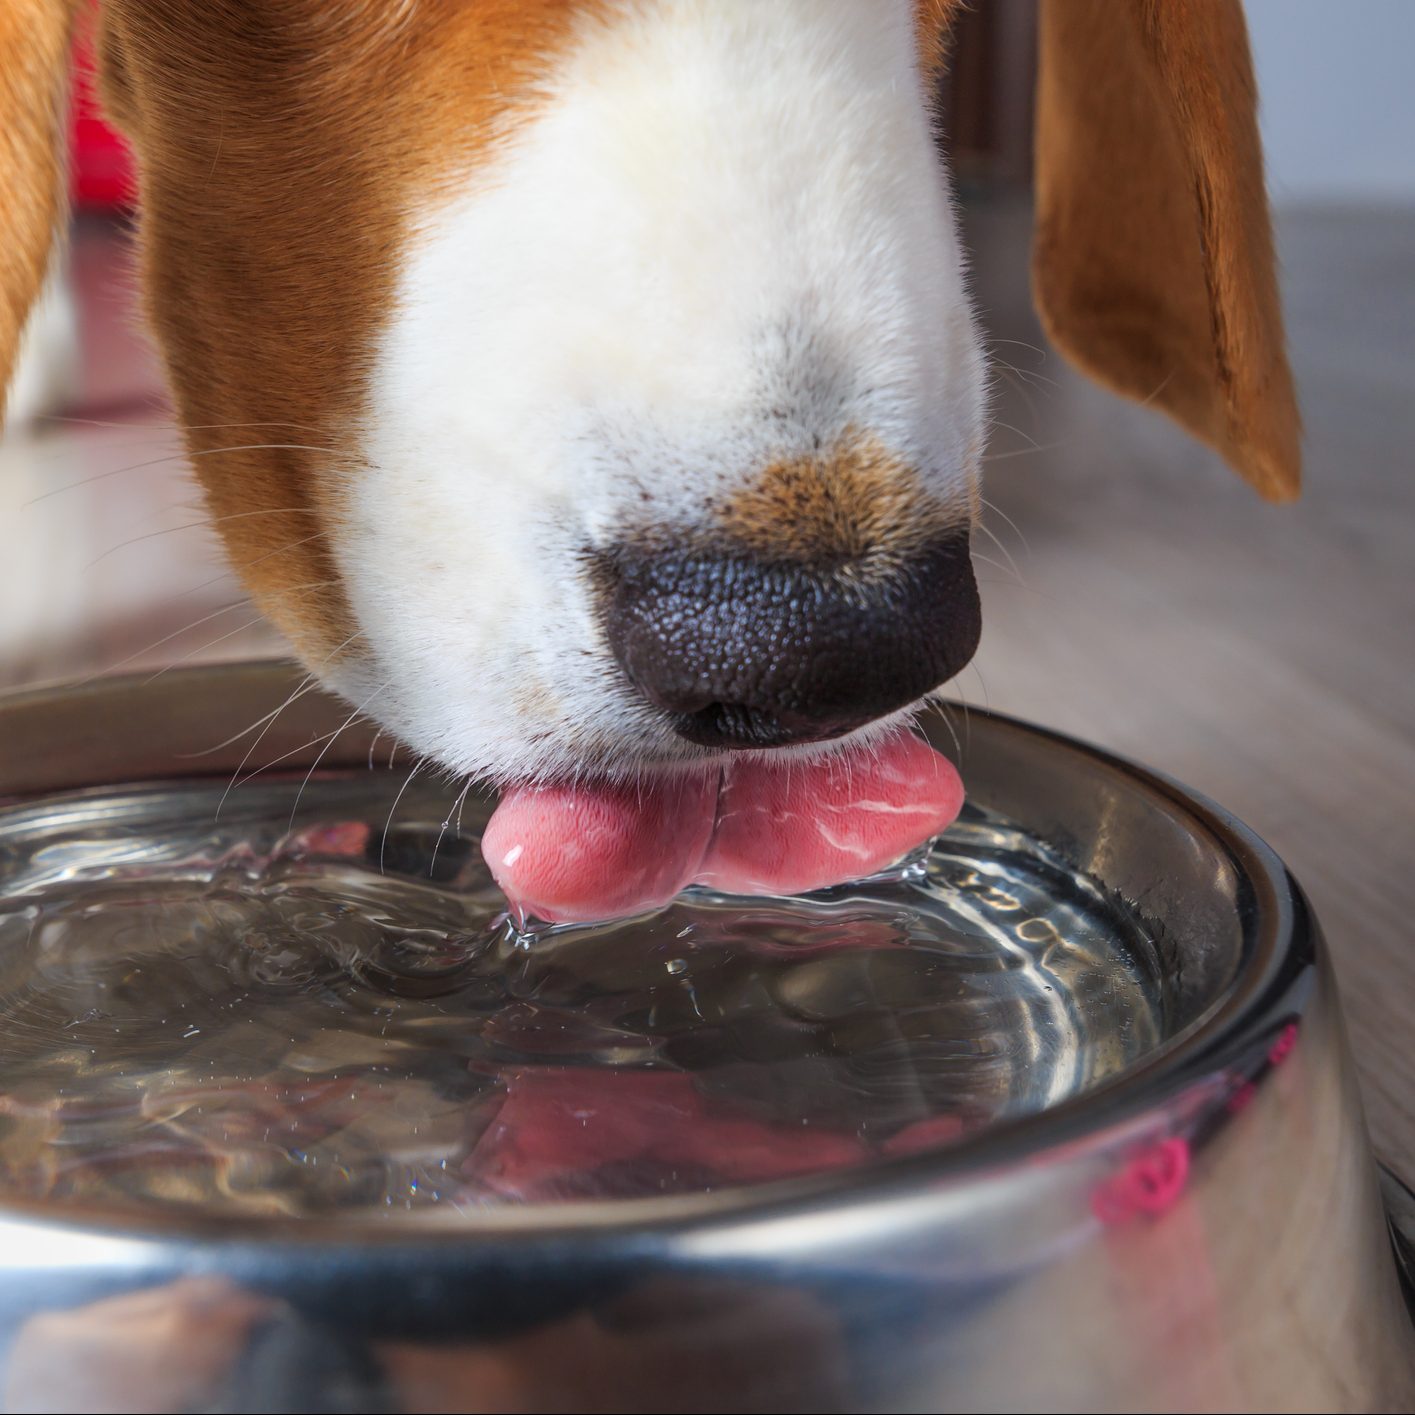 This No-spill Water Bowl Helps Slow Down Dogs Who Drink Too Fast – SheKnows